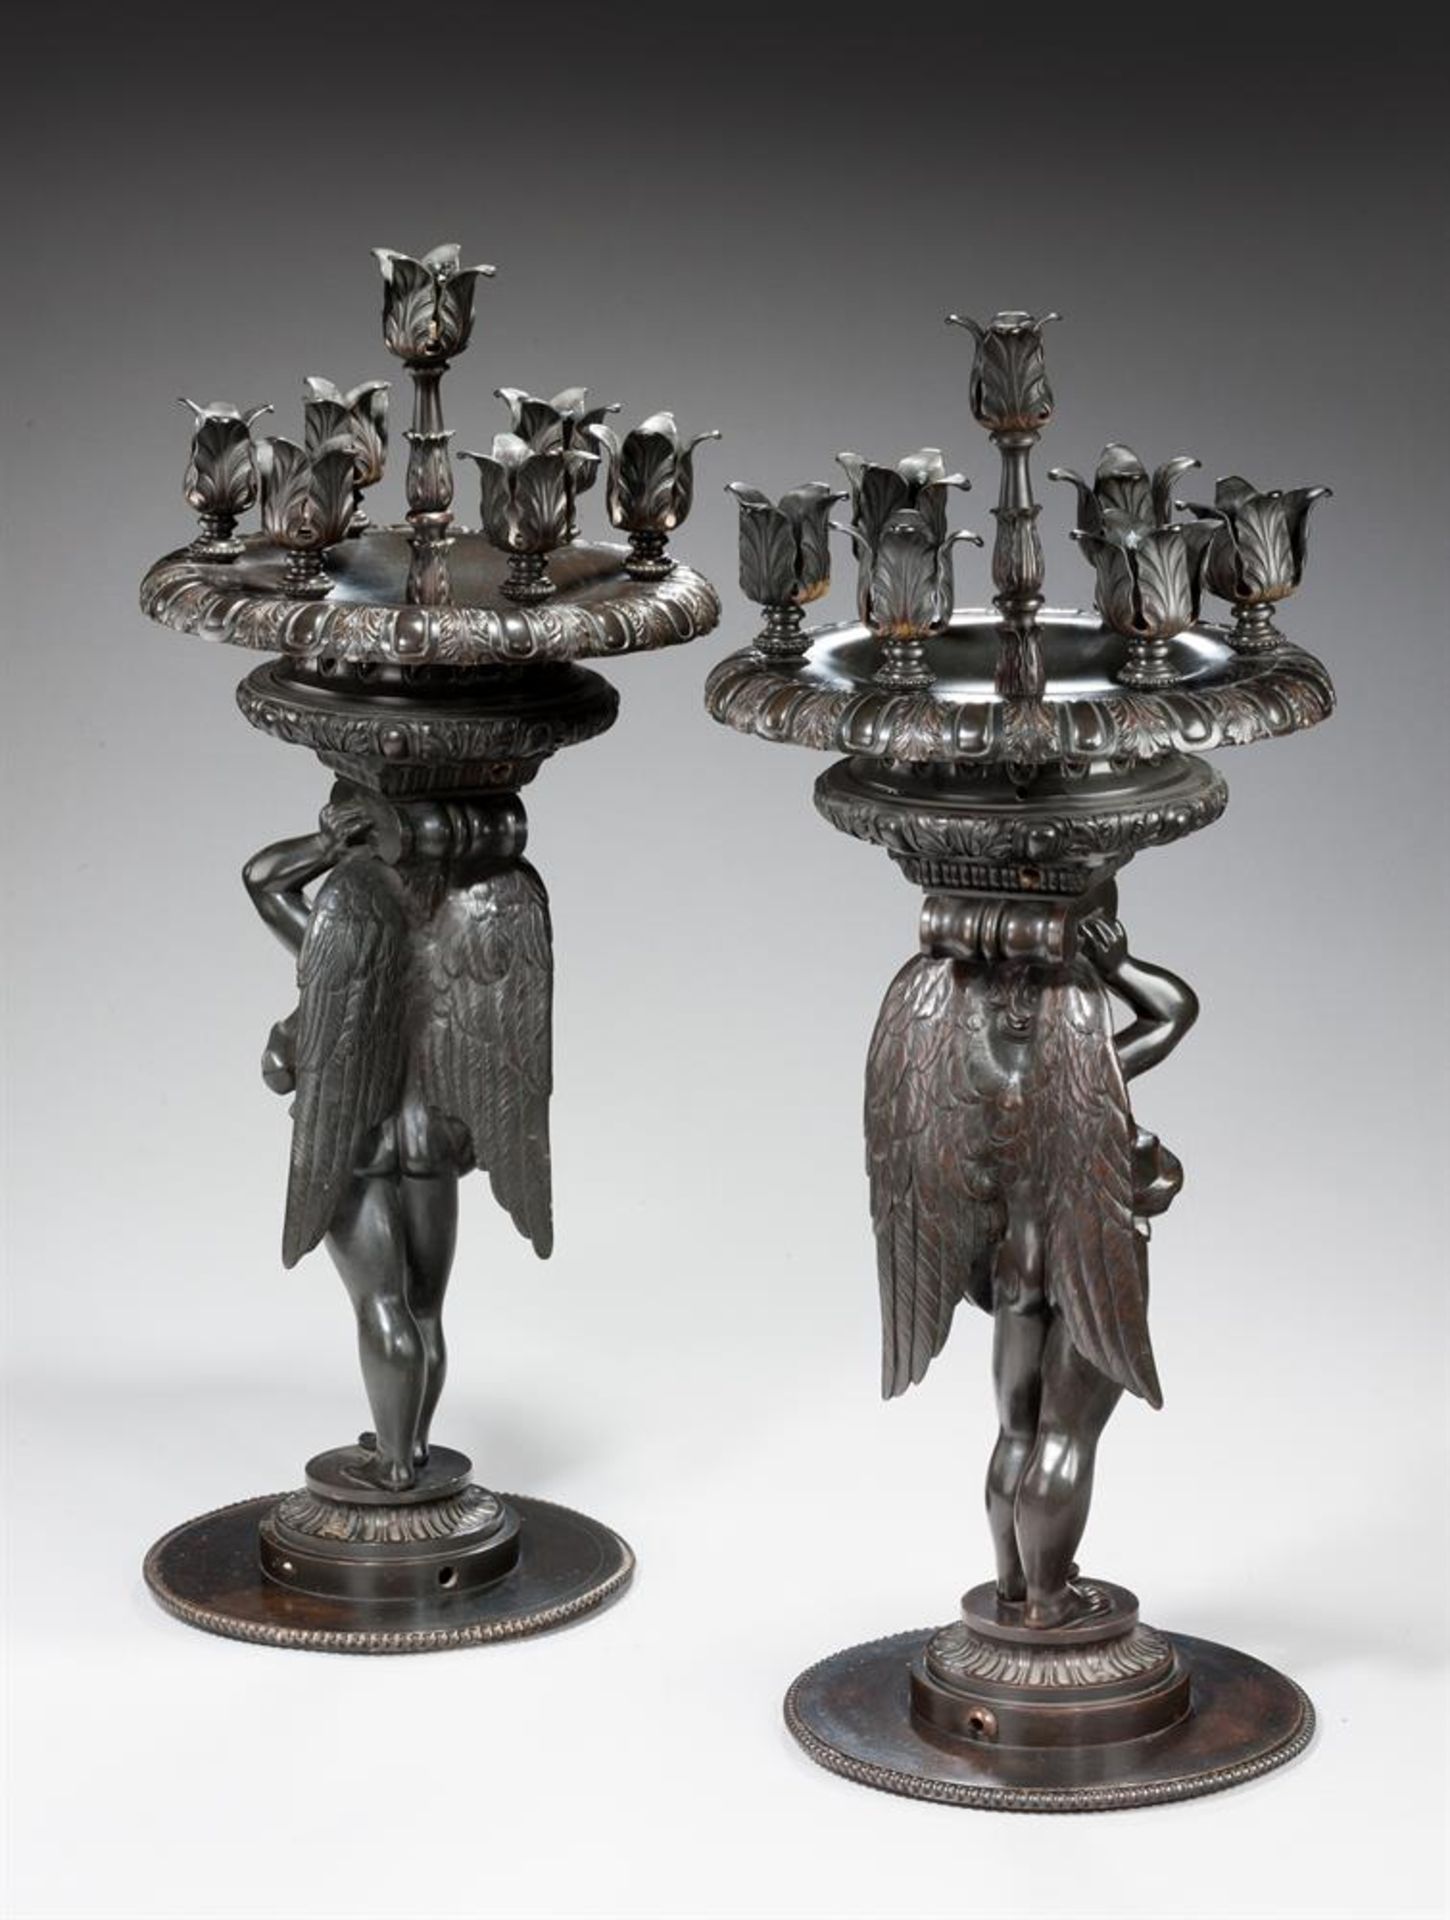 A PAIR OF BRONZE FIGURAL TABLE CANDELABRA, ITALIAN, LATE 19TH/EARLY 20TH CENTURY - Image 4 of 5